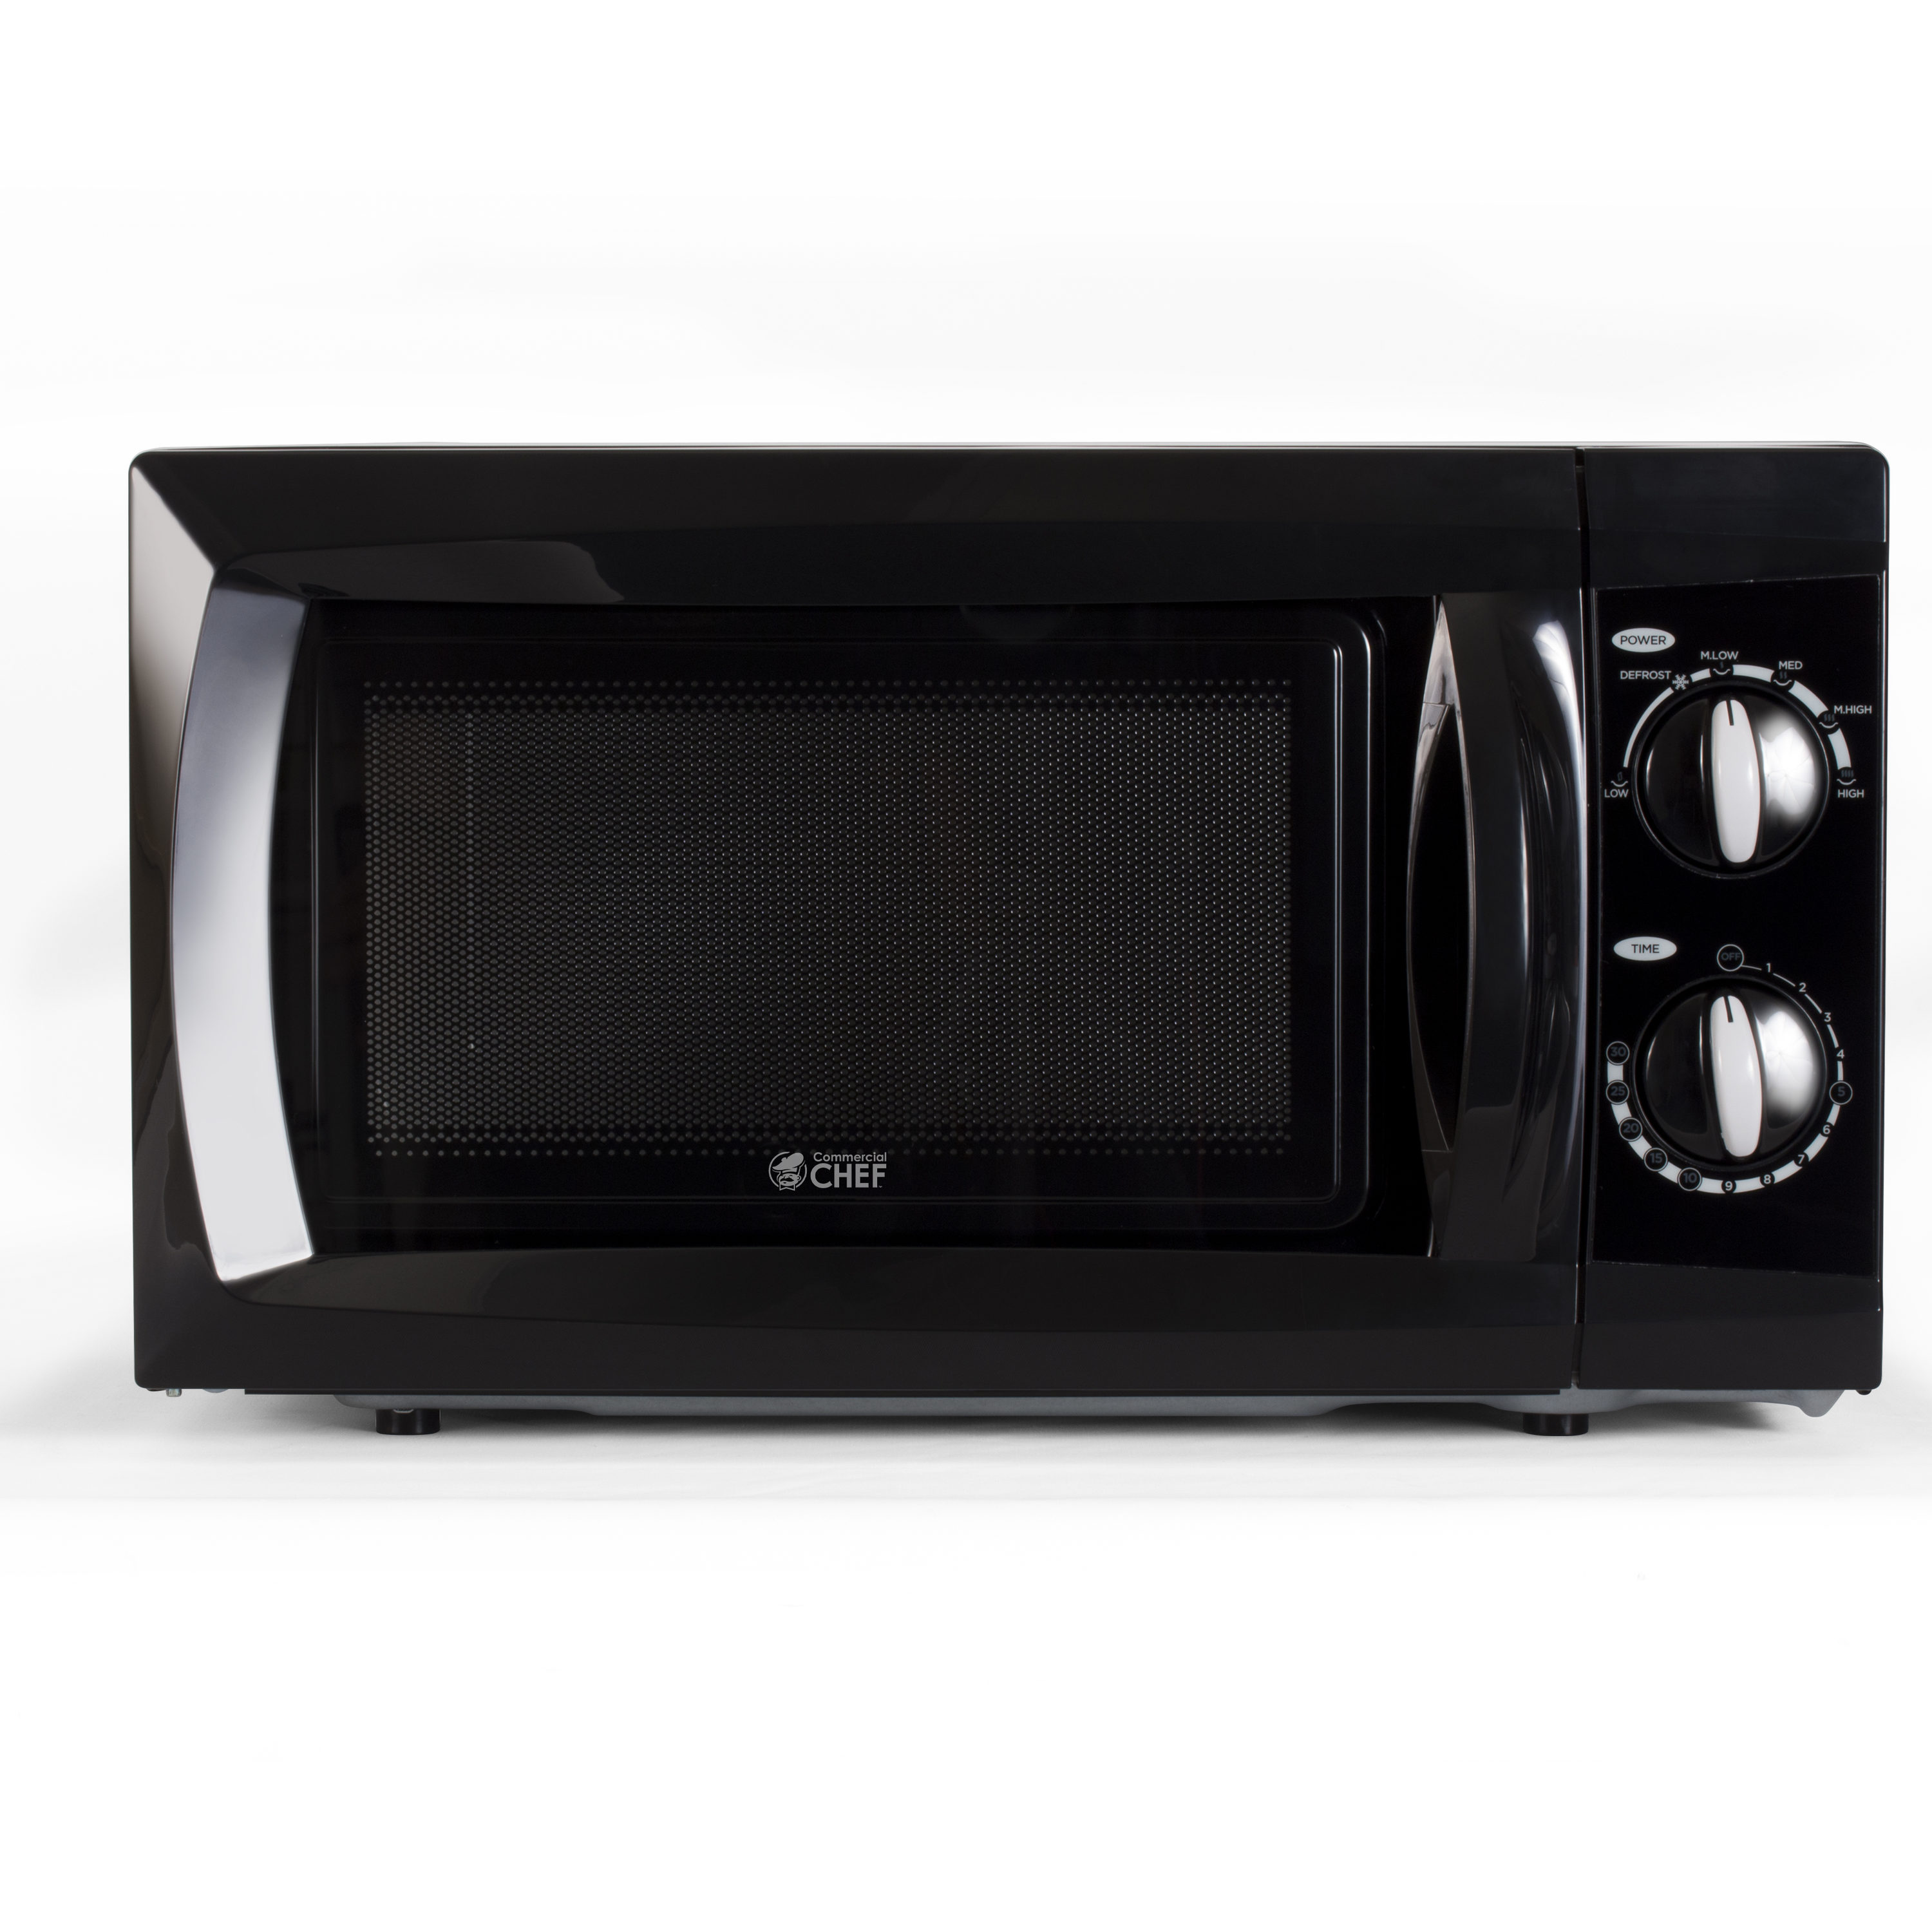 Commercial Chef 0.7 Cubic Feet Countertop Microwave & Reviews